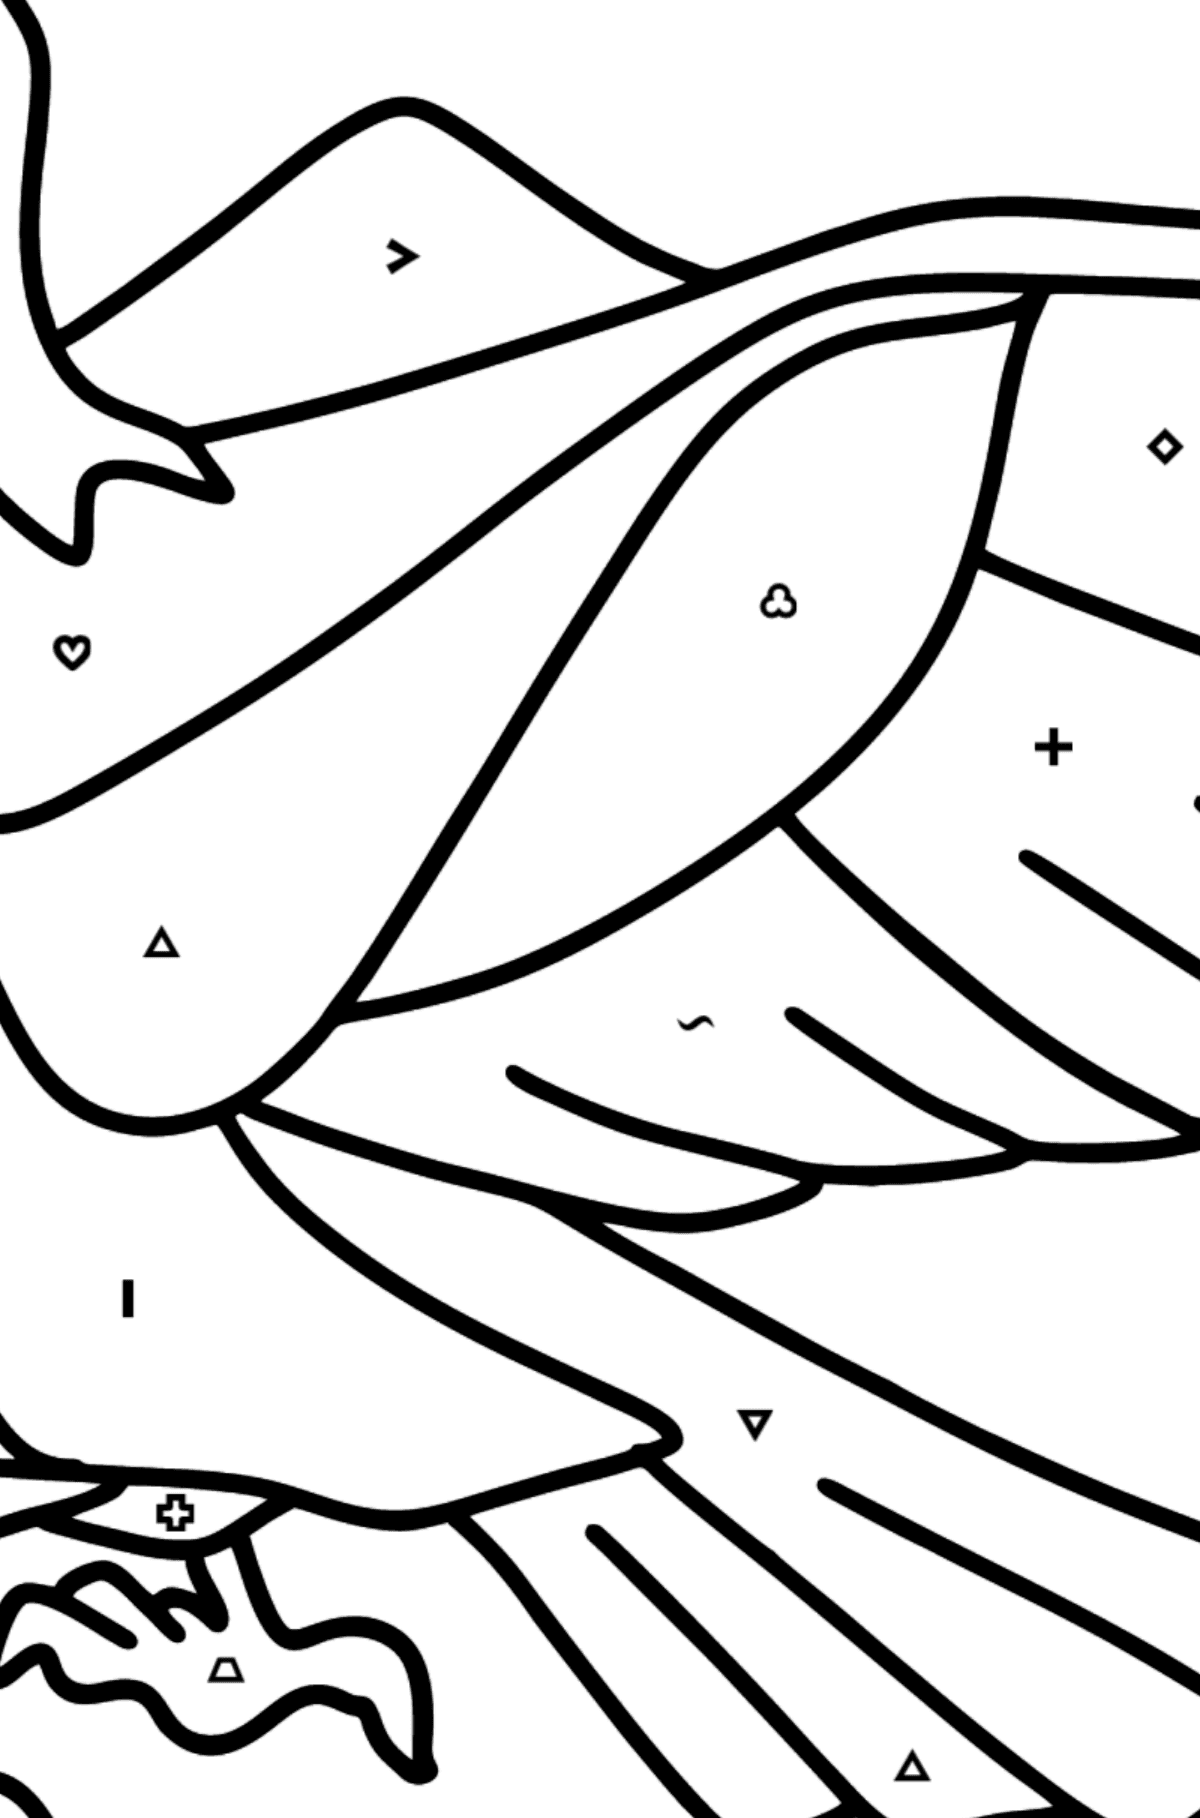 Beautiful Eagle coloring page - Coloring by Symbols and Geometric Shapes for Kids